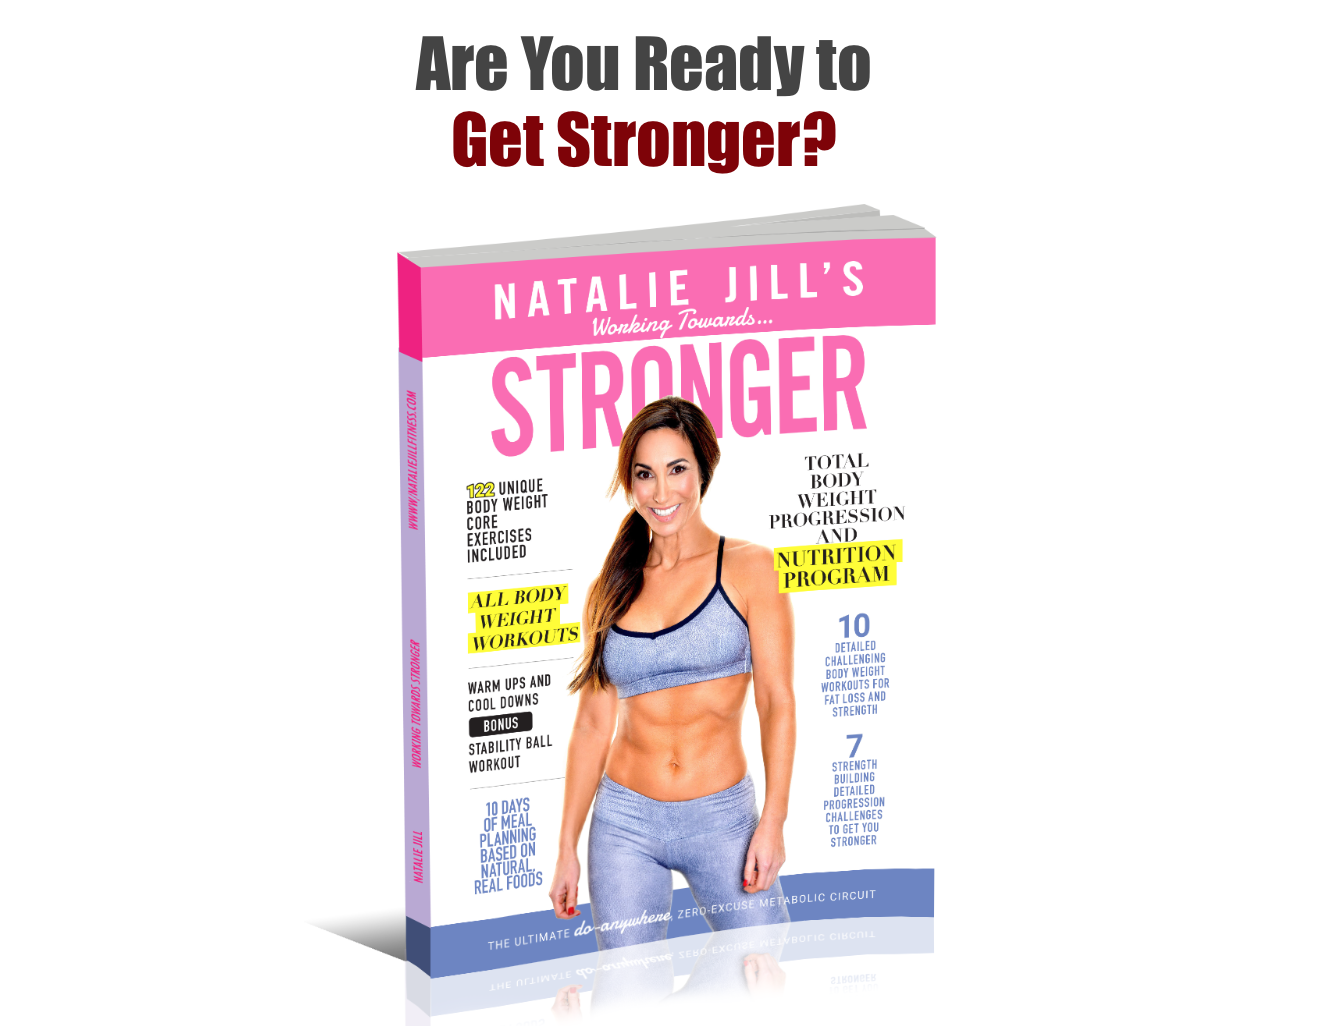 Are you ready to get stronger?